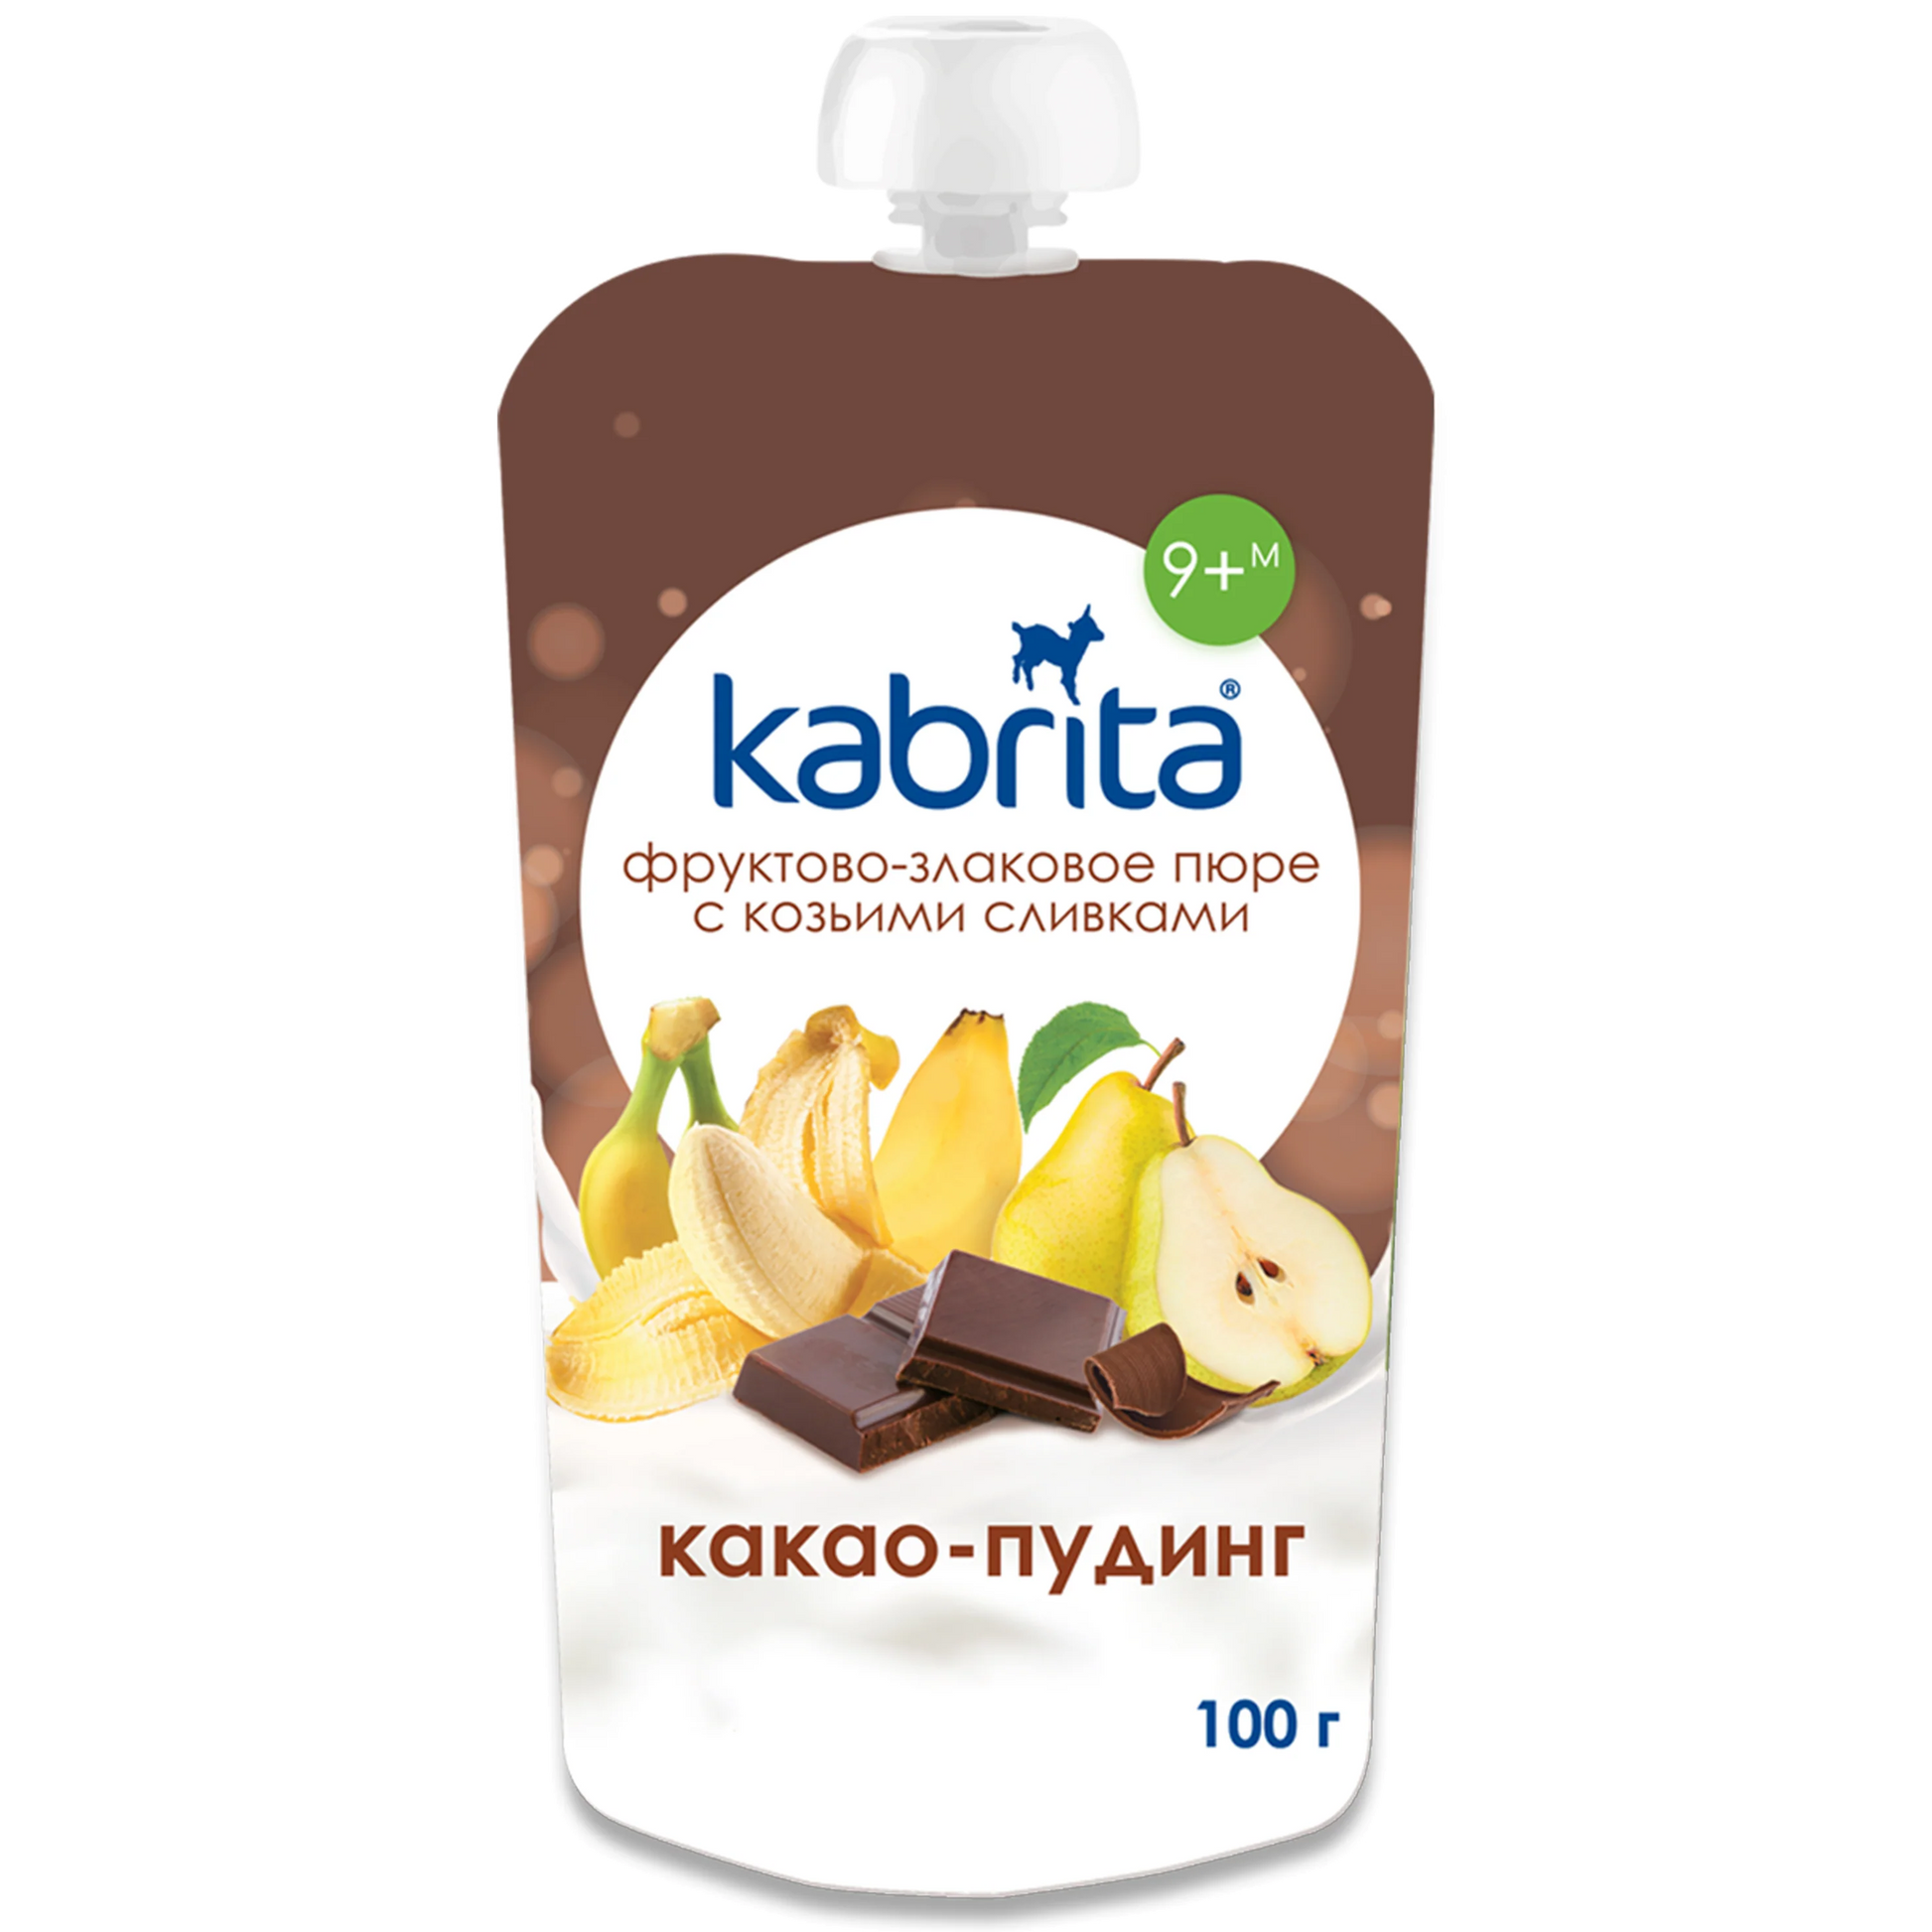 Kabrita Cocoa Pudding With Fruit, Cereal And Goat Cream 100 G - 6 Pouches - Emmbaby Canada